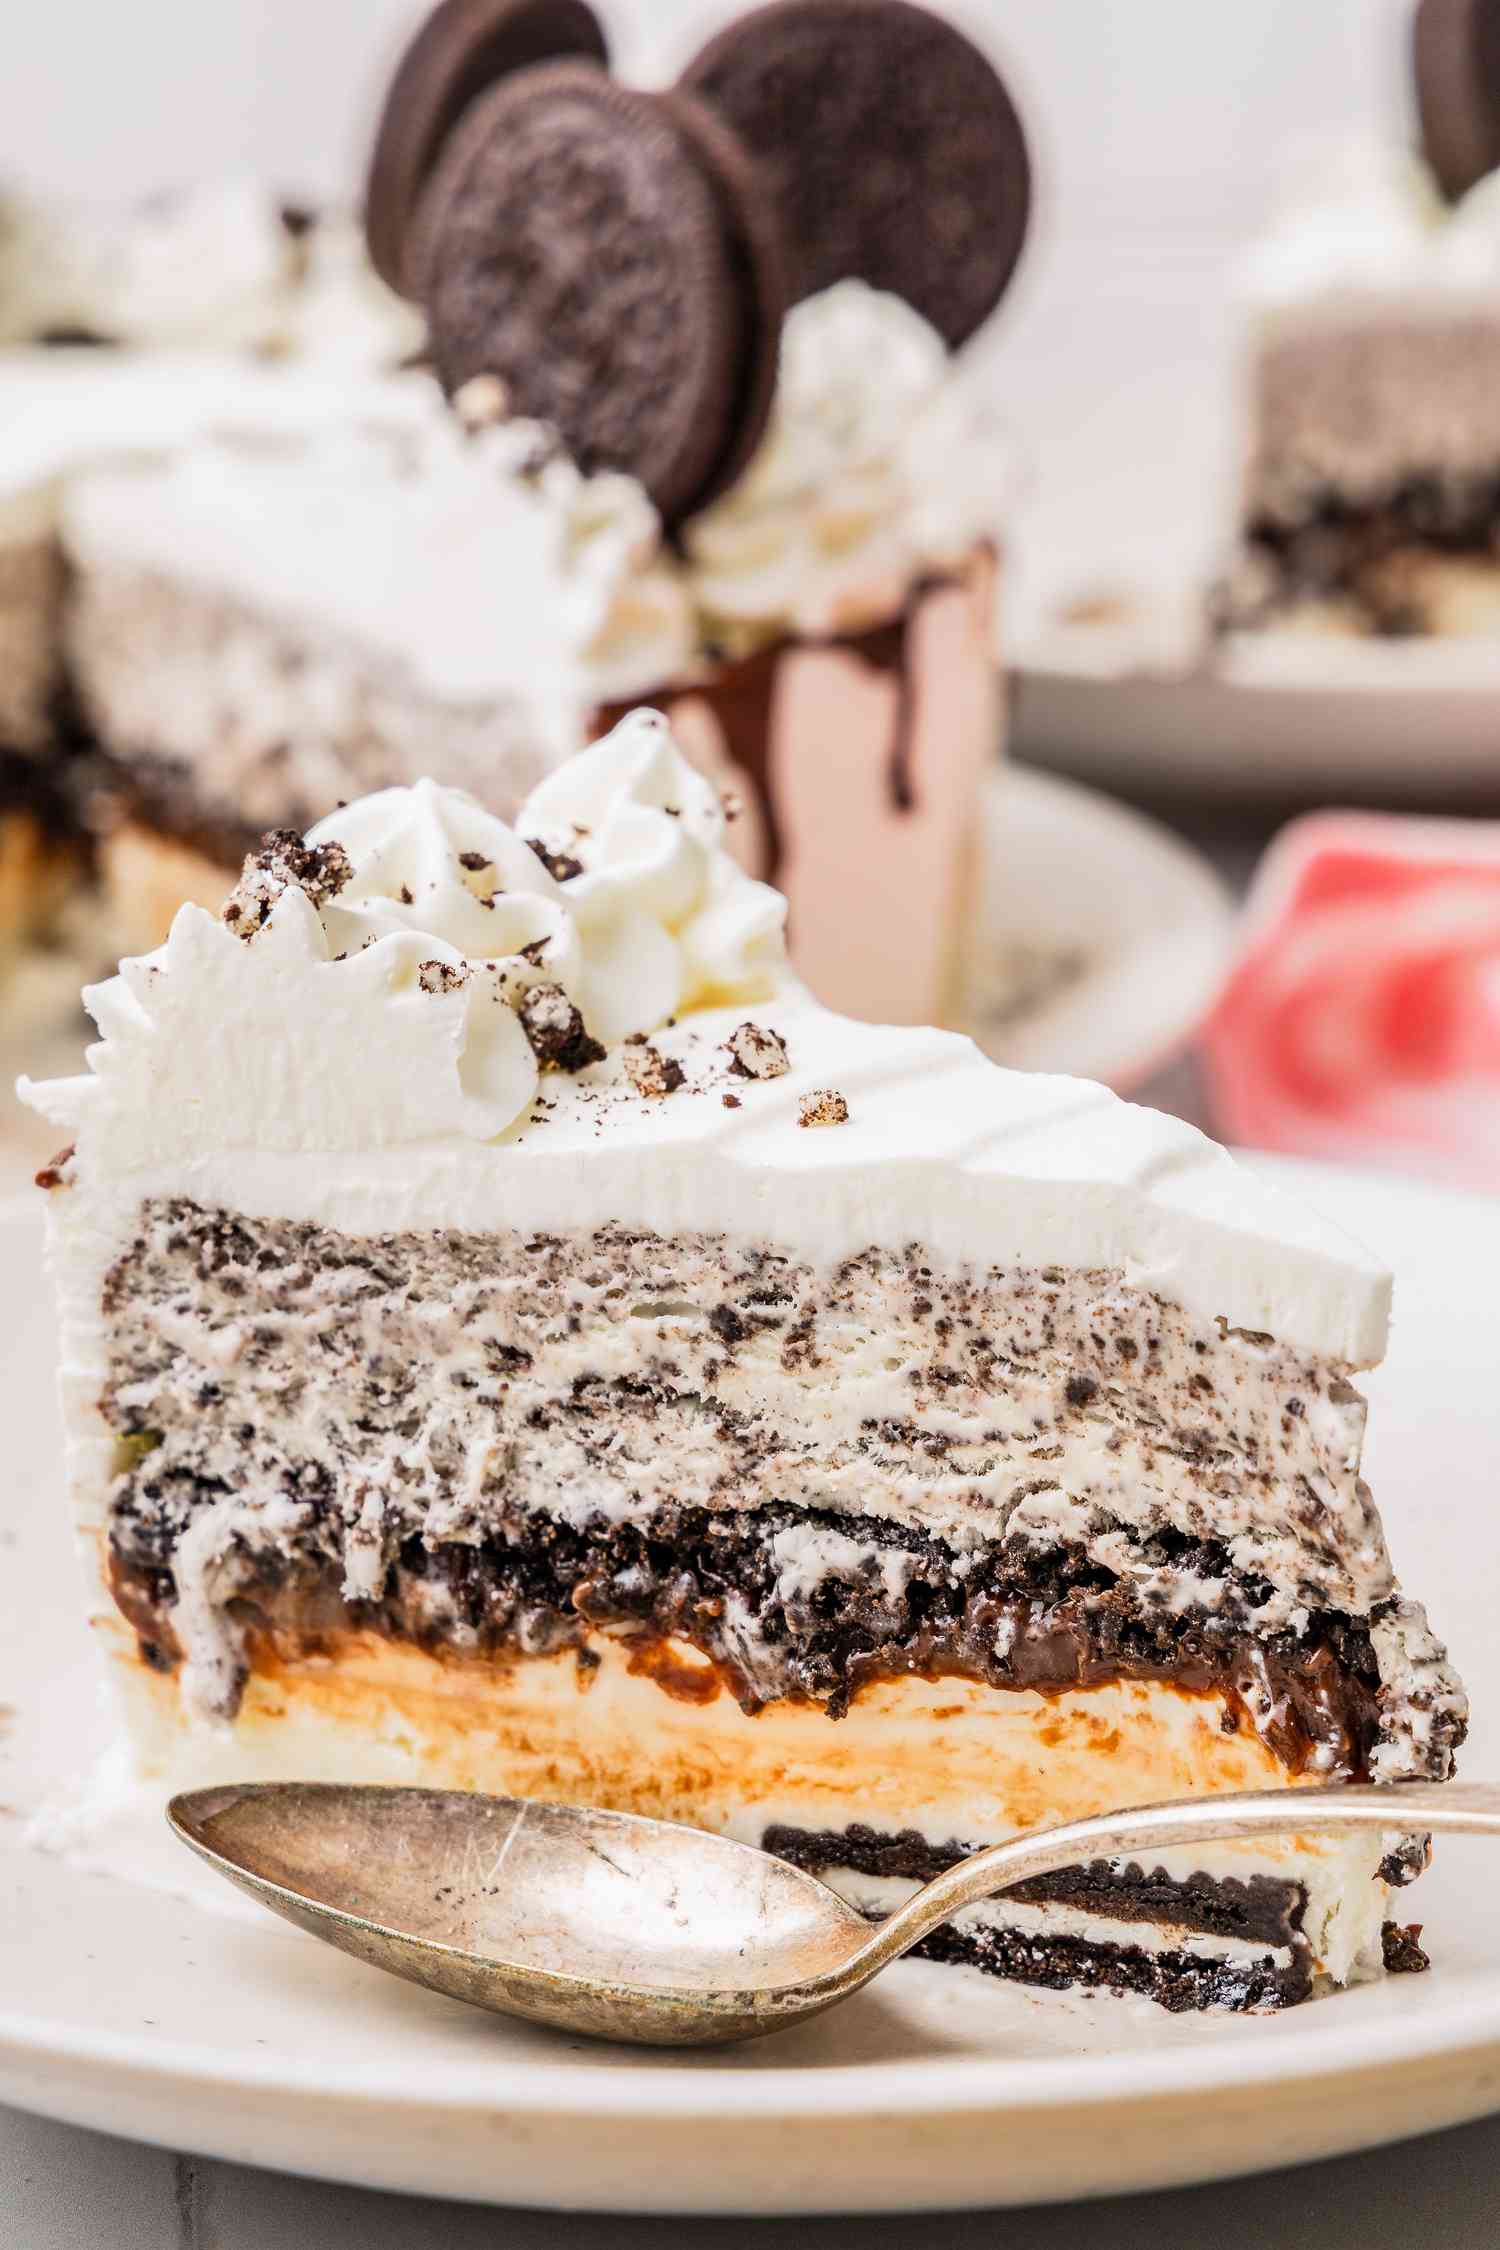 Slice of Oreo Ice Cream Cake on a Plate With a Spoon, and in the Surroundings, More Cake on a Plate, Another Slice on a Plate, and a Kitchen Towel